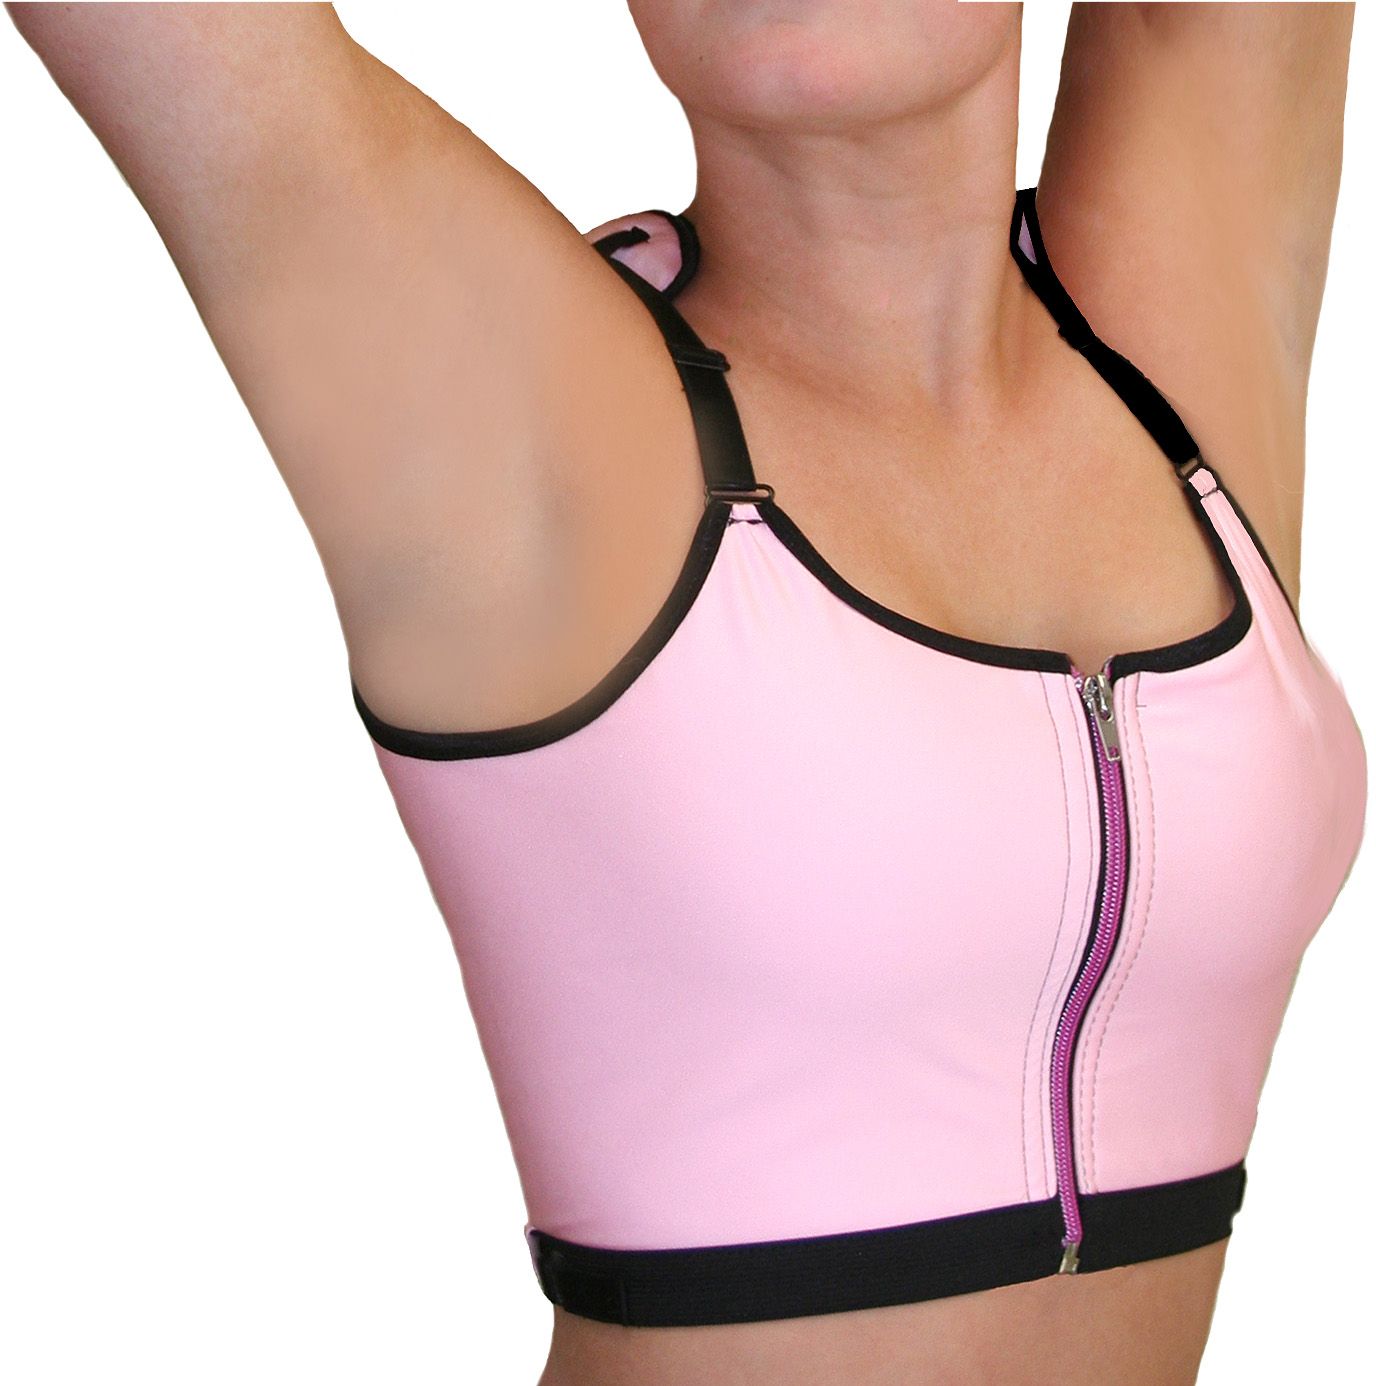 A Medical or Surgical Bra is Designed to Assist Recovery after Surgery